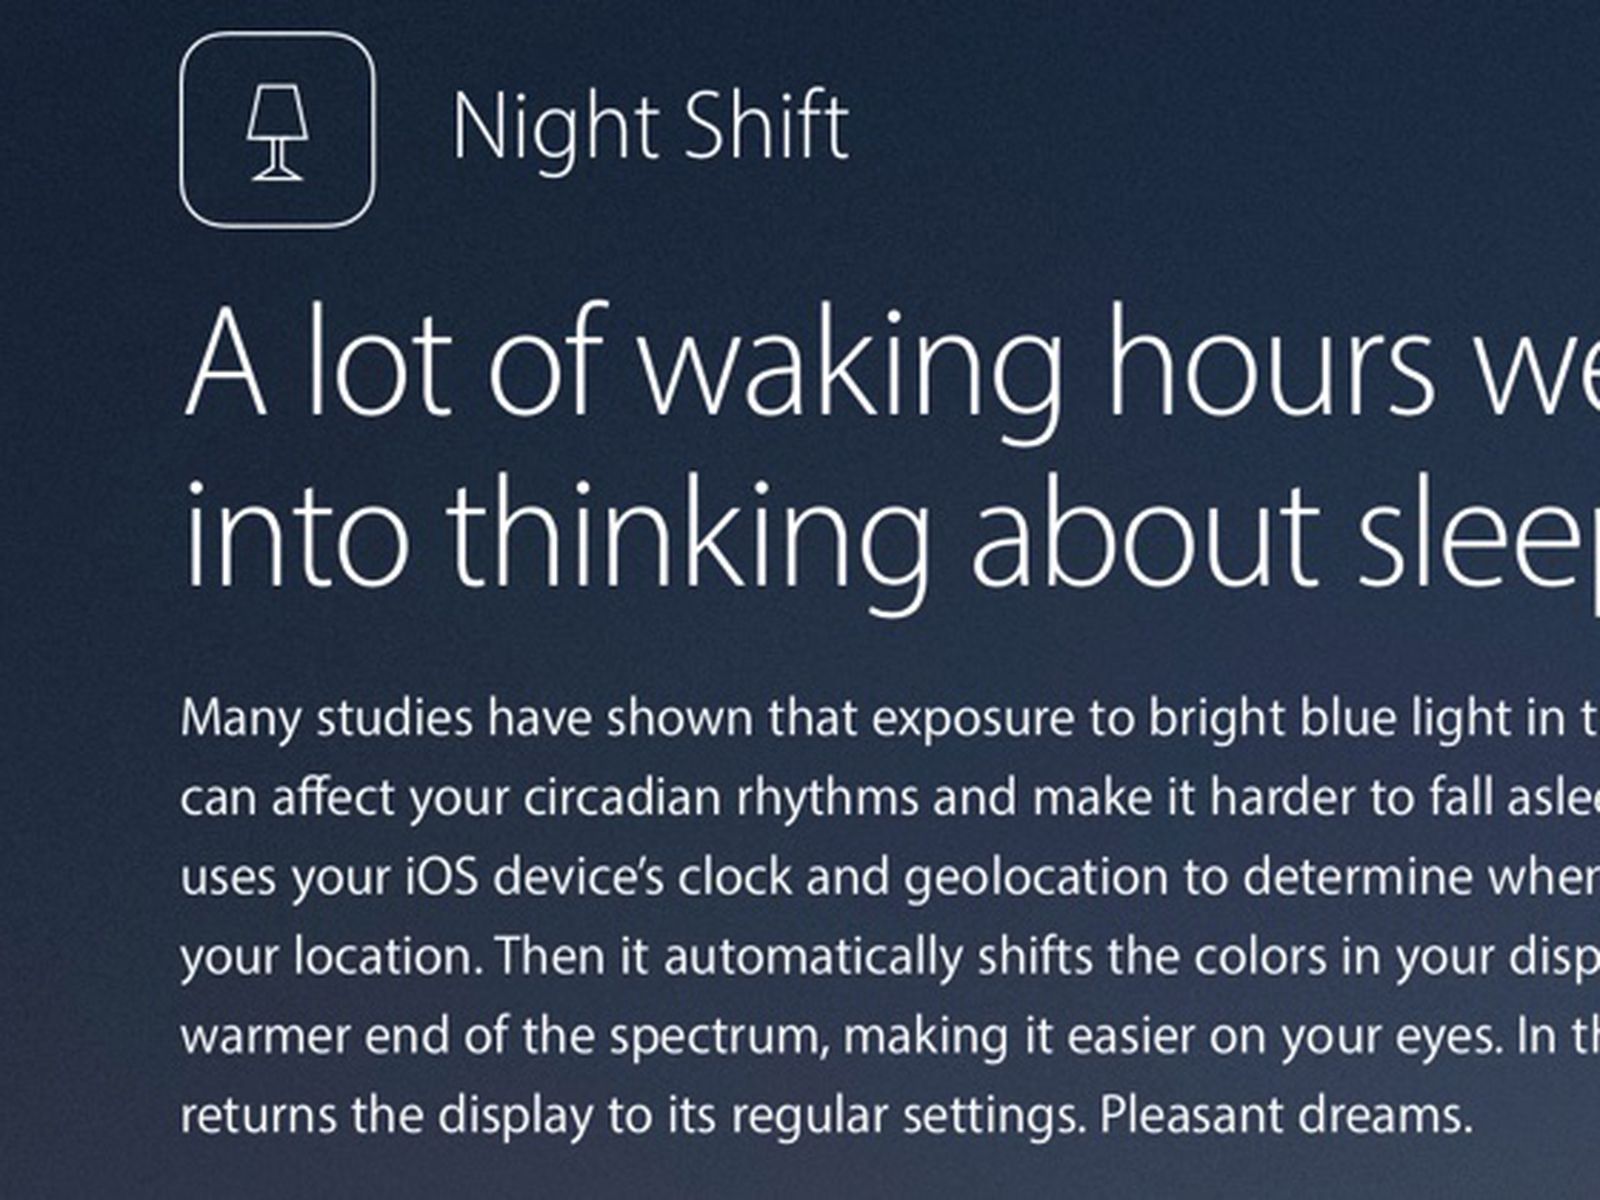 Why Apple's Night Shift Is Good for You